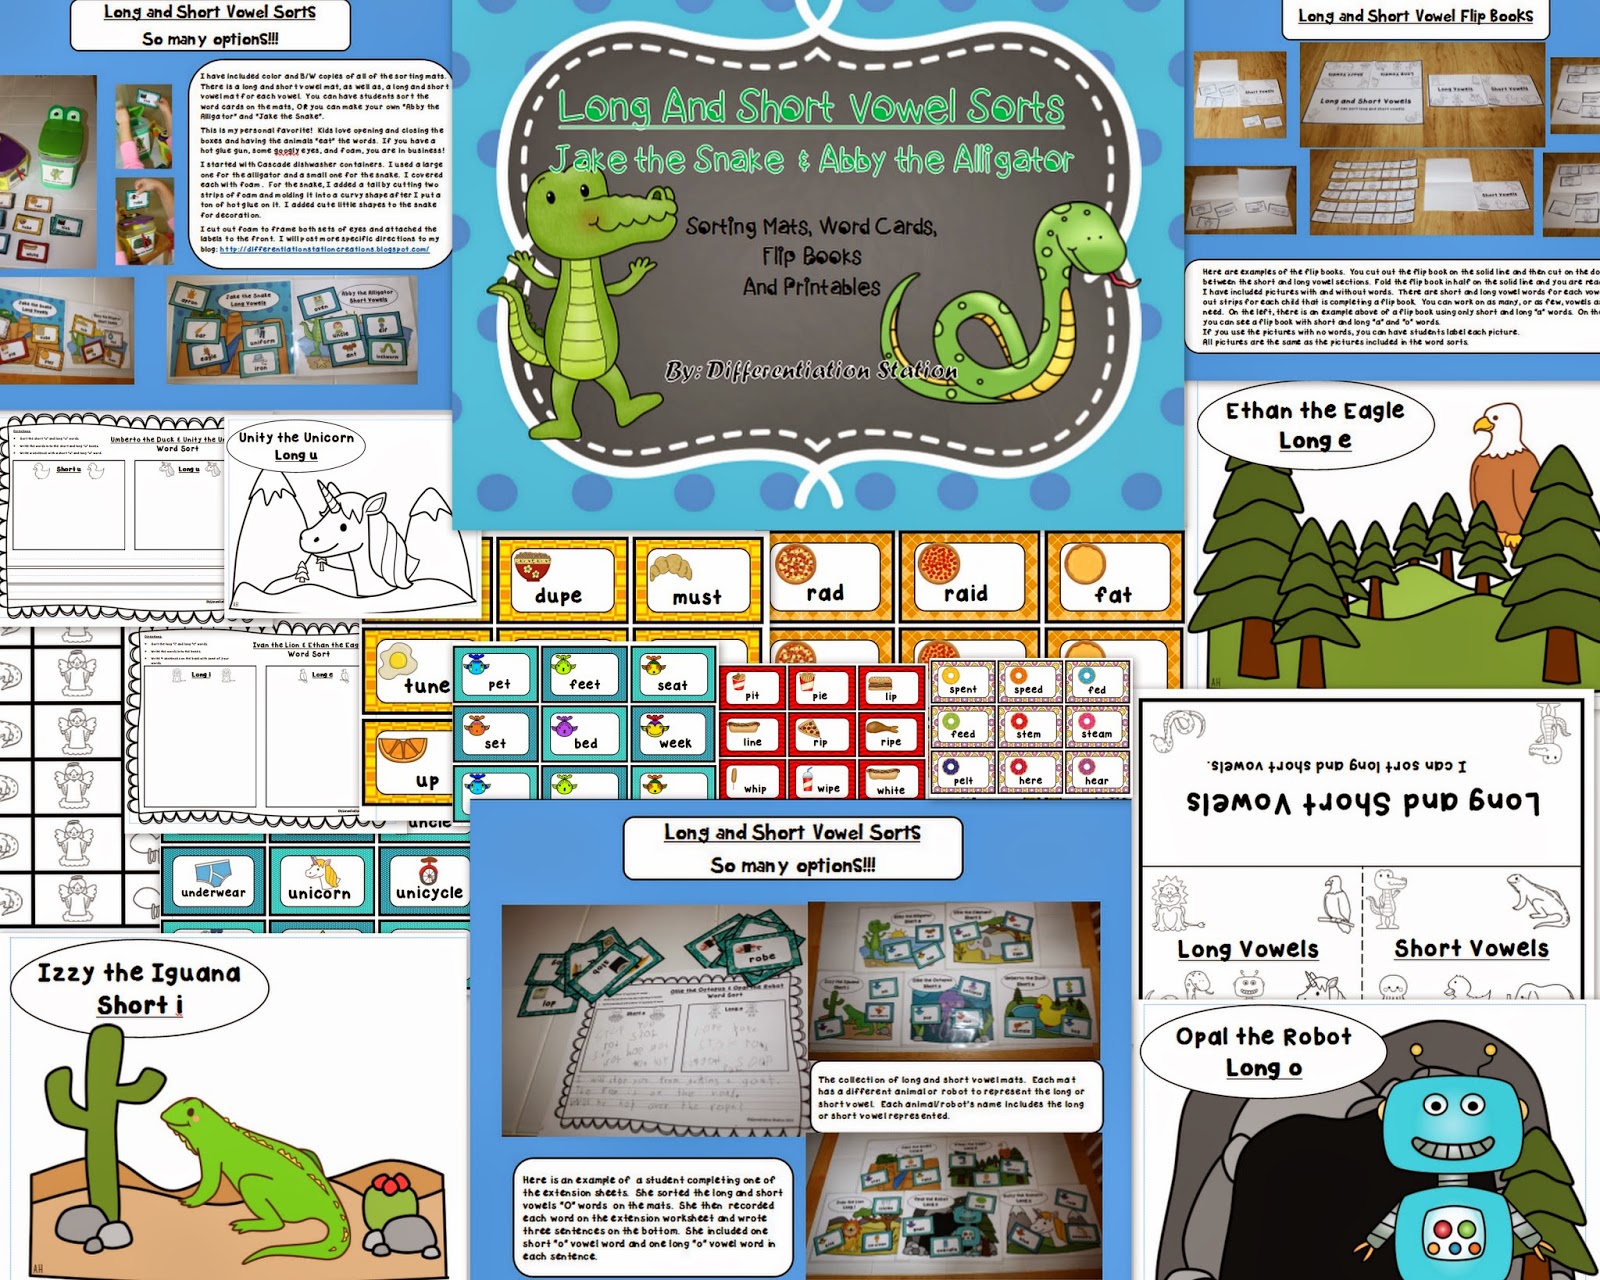 http://www.teacherspayteachers.com/Product/Long-and-Short-Vowel-Sorts-Sorting-Mats-Word-Cards-Flip-Books-and-Printables-1026814